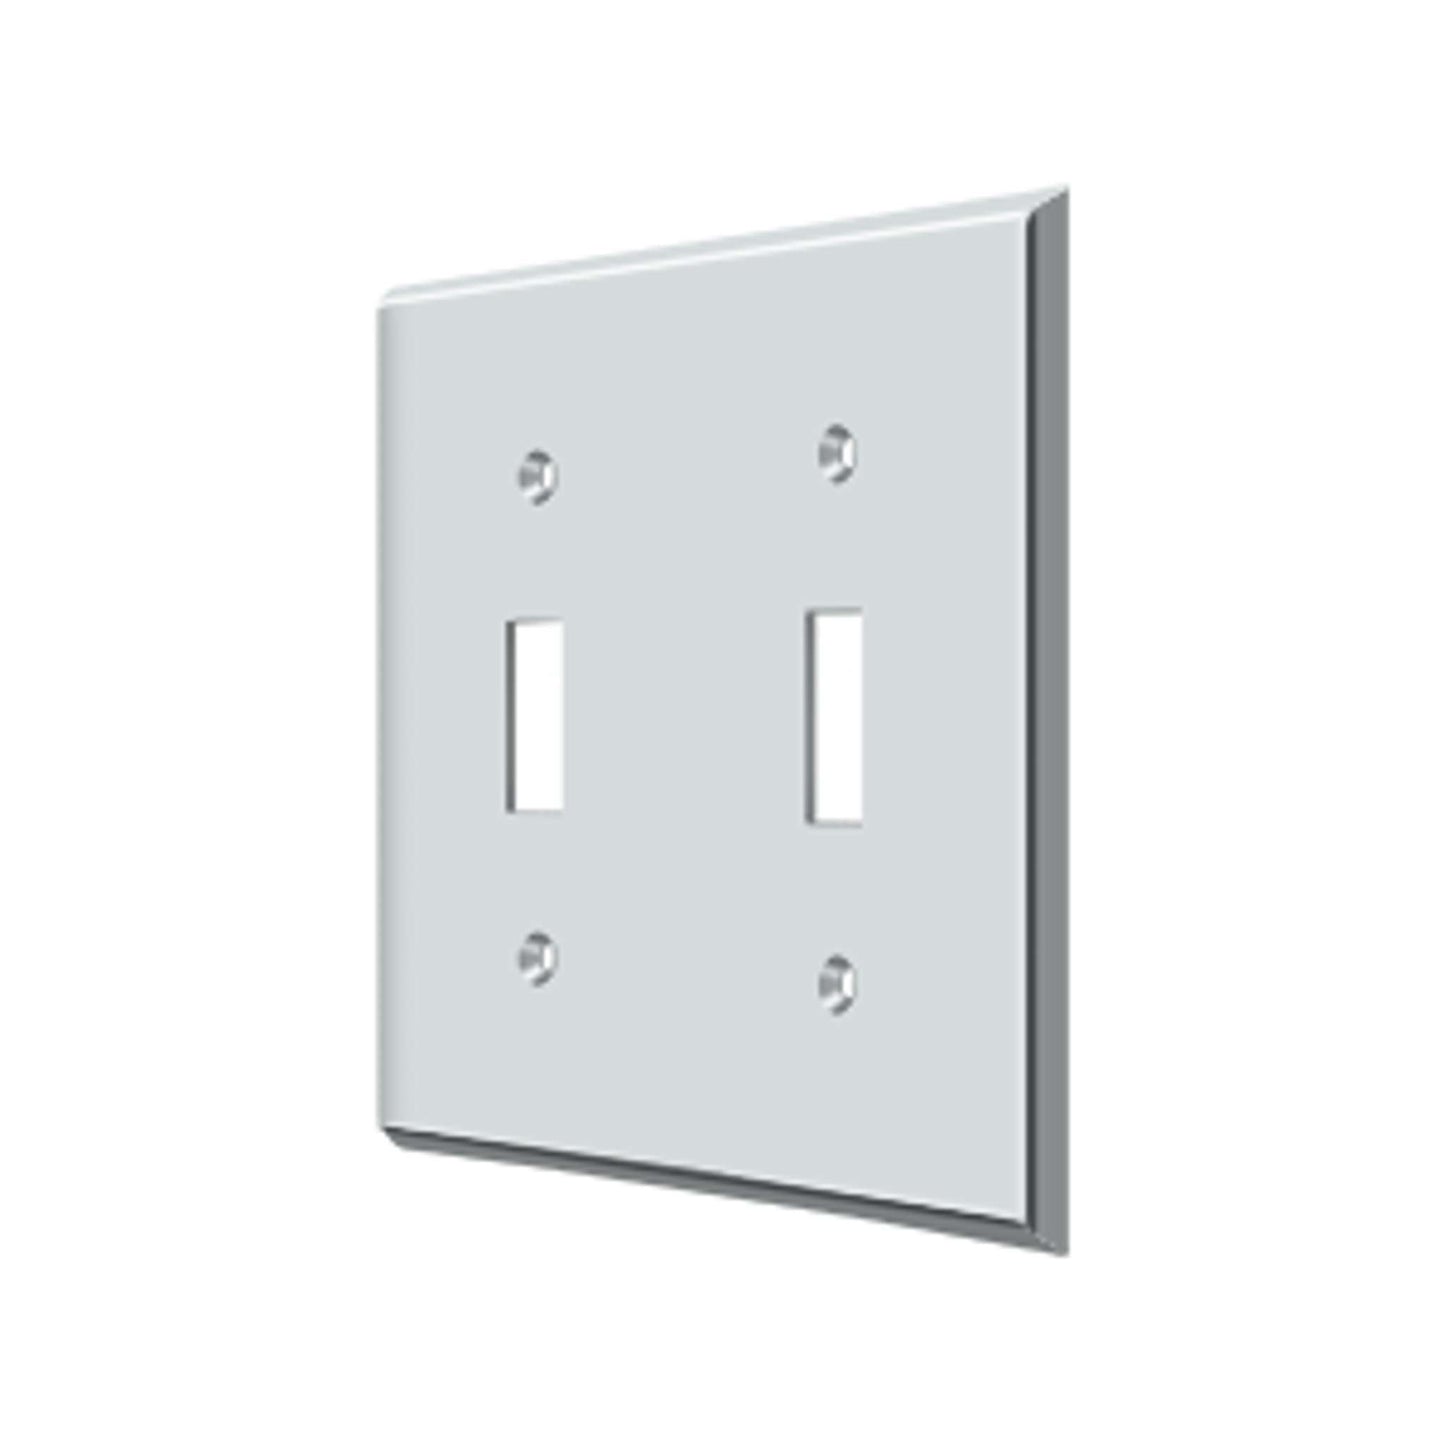 Deltana - Switch Plate, Double Standard